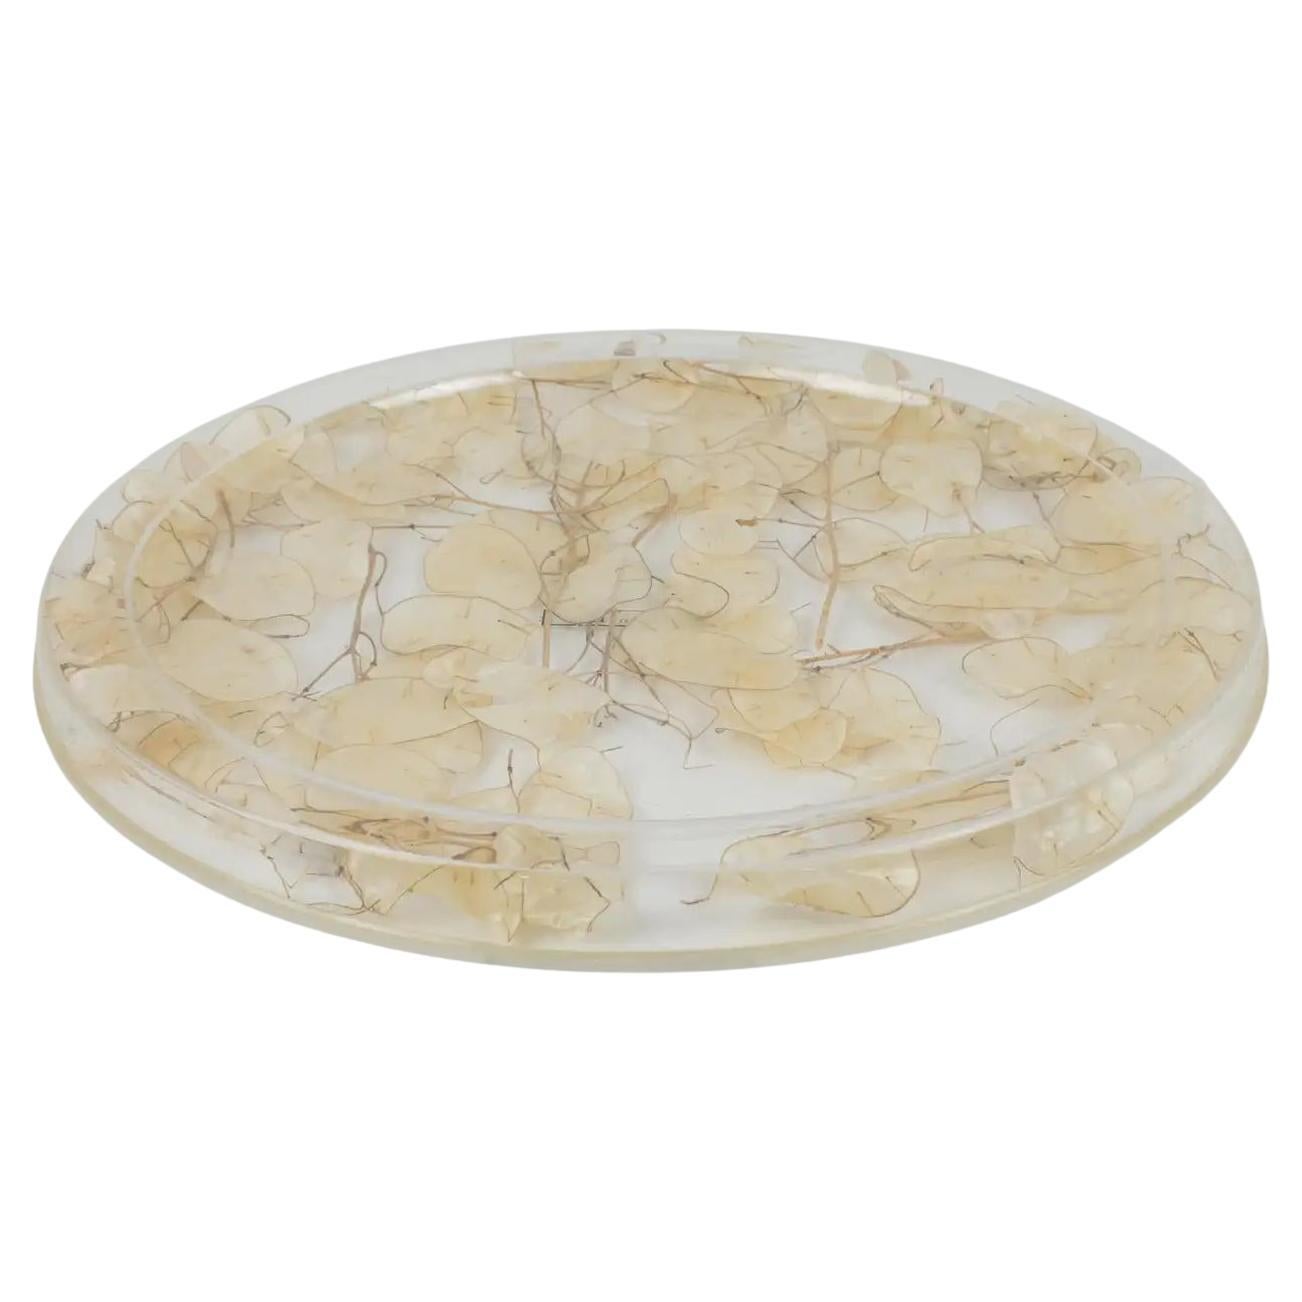 Christian Dior Home Collection Lucite-Tablettplatte mit Dried Lunaria